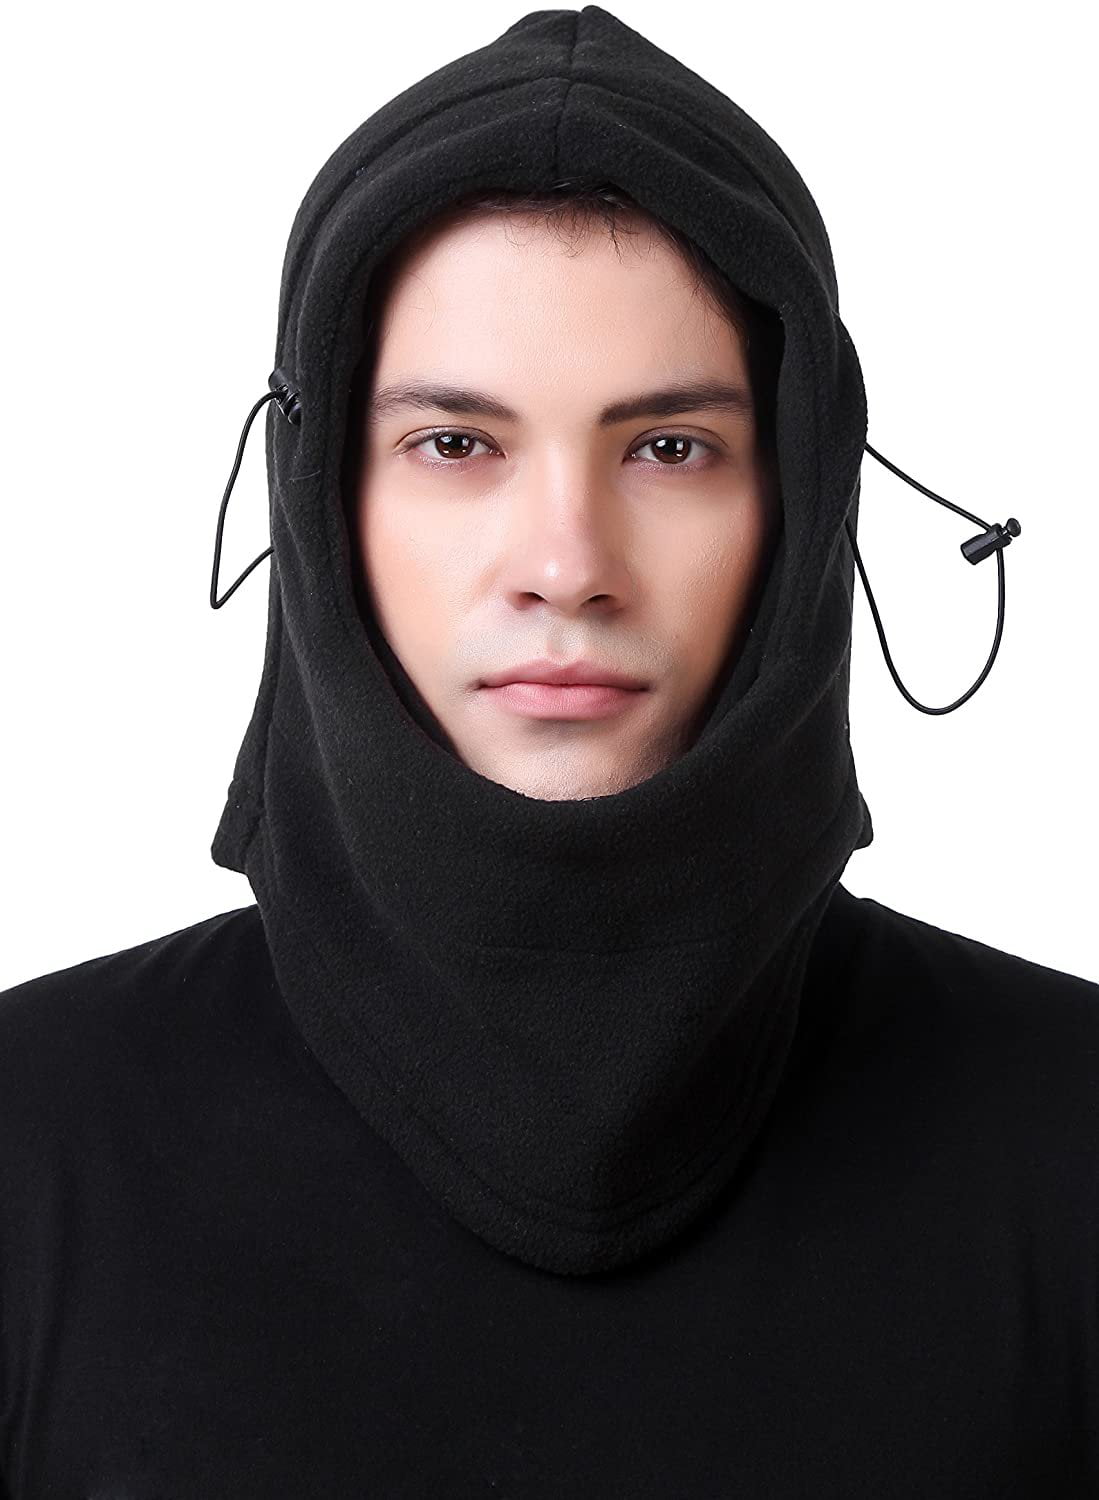 Soft Fleece Neck Gaiter Warmer Face Mask Cover Motorcycle Ski for Cold Weather 